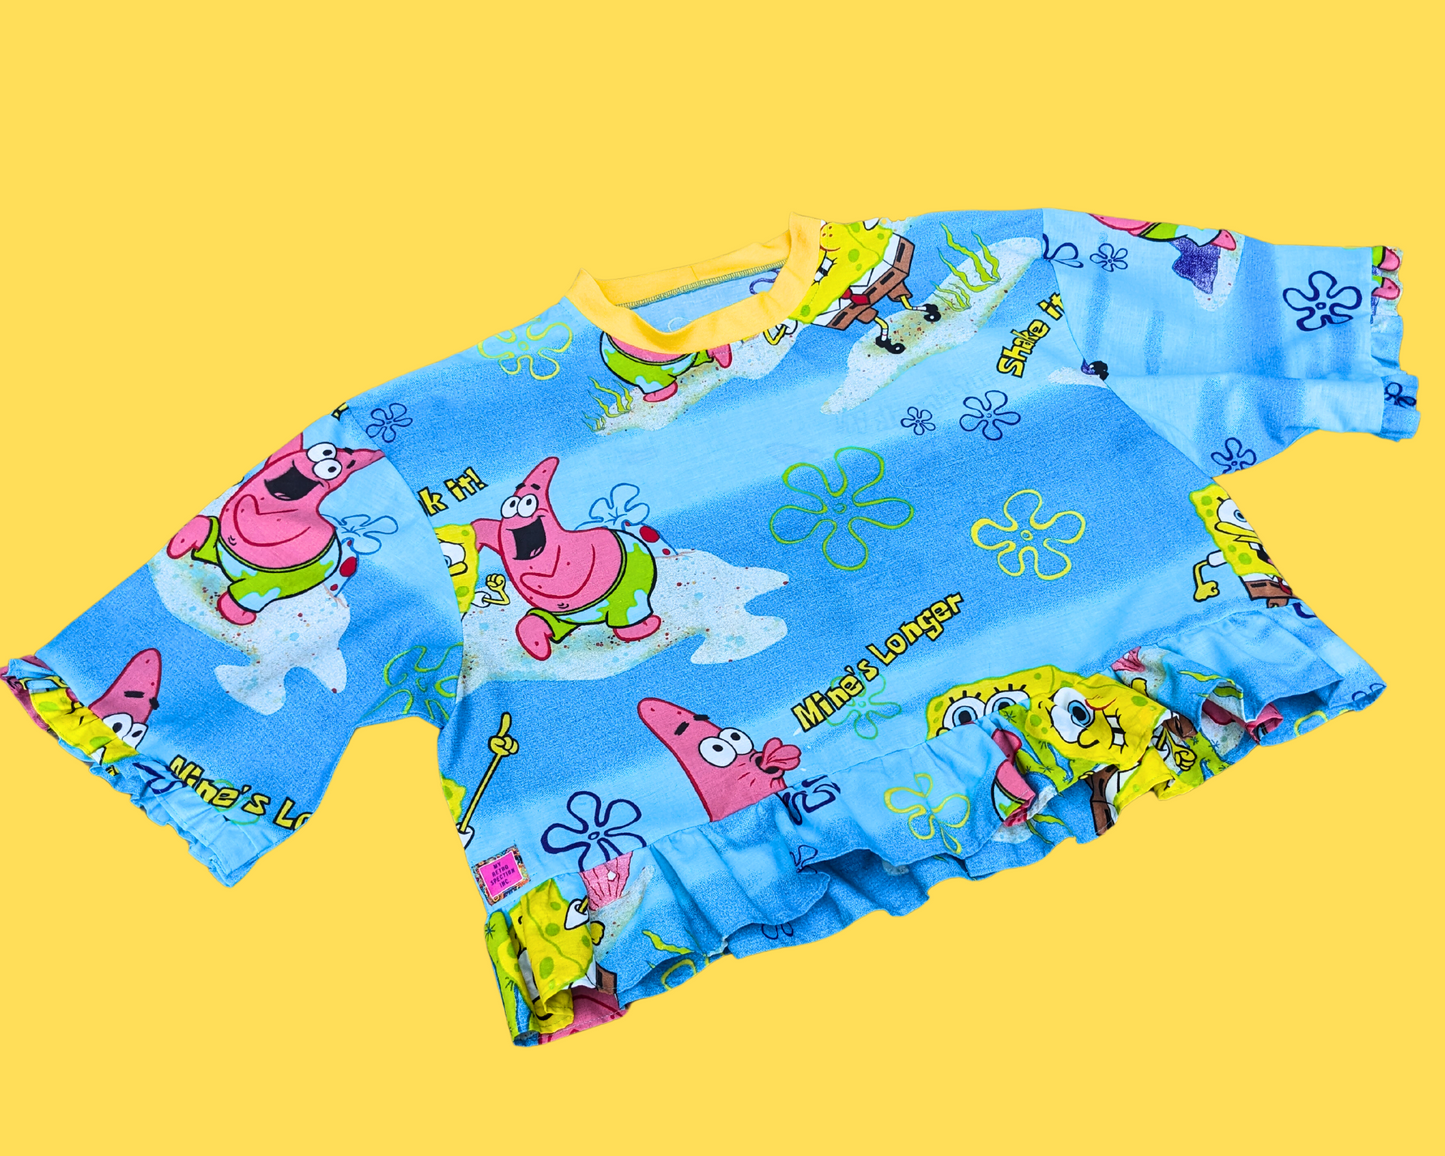 Handmade, Upcycled Sponge Bob Square Pants Bedsheet Crop Top Fits Size S to XL